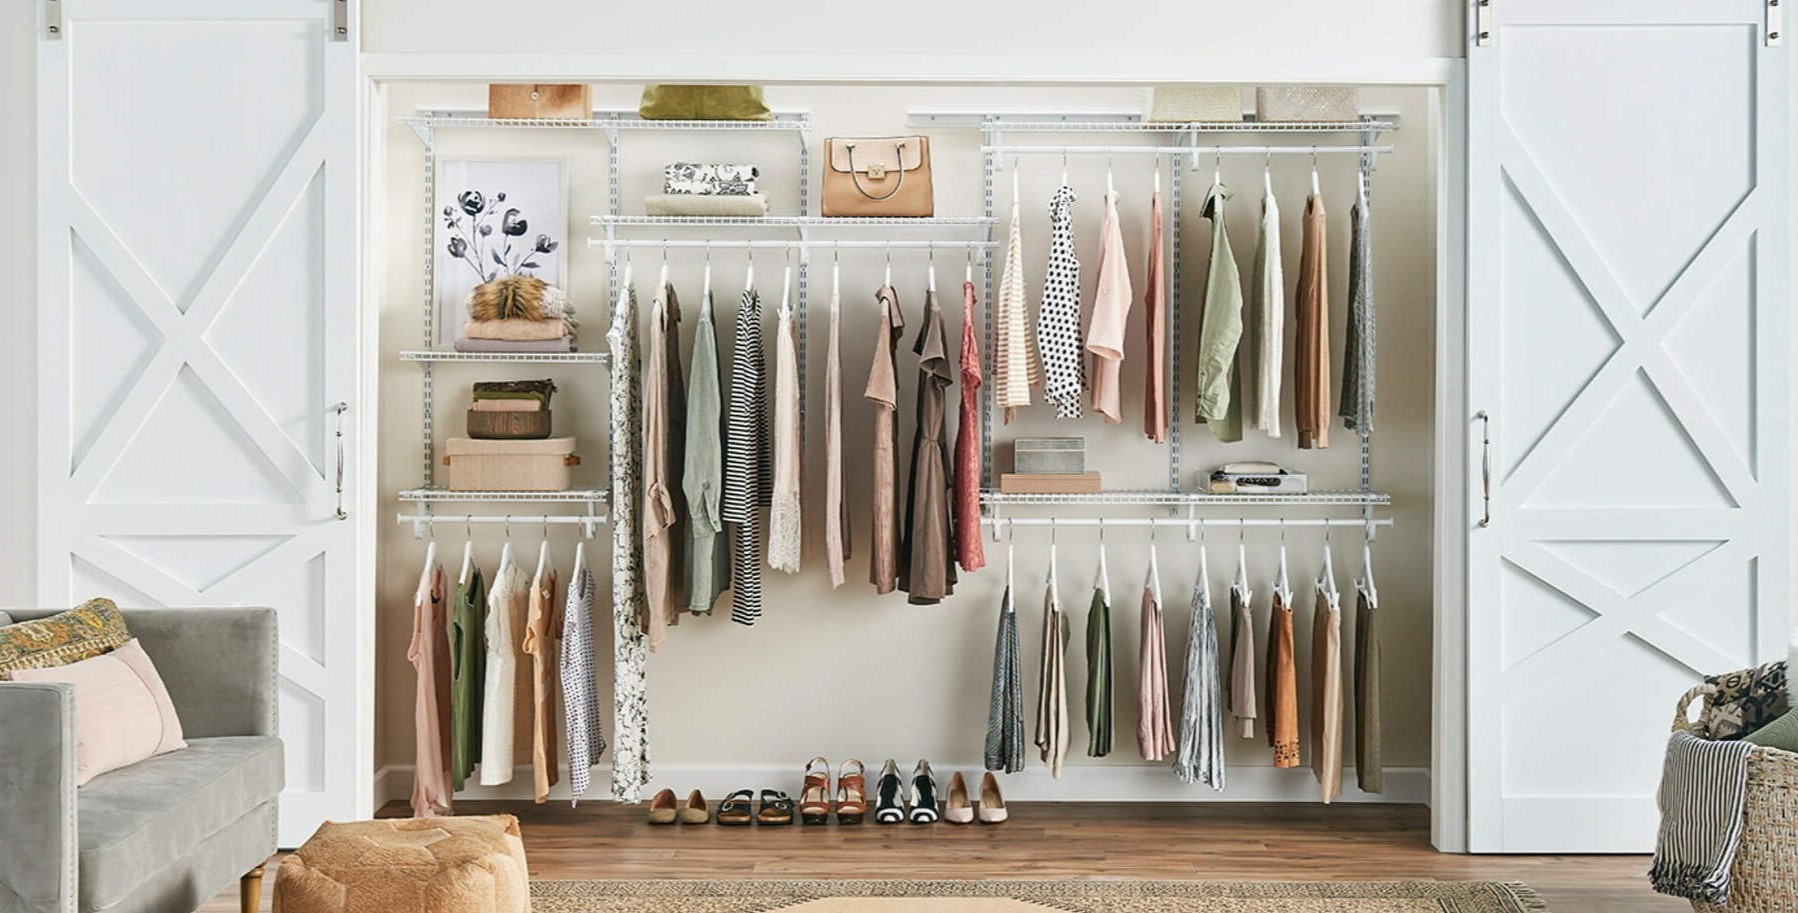 How To Organize Closet With Wire Shelves